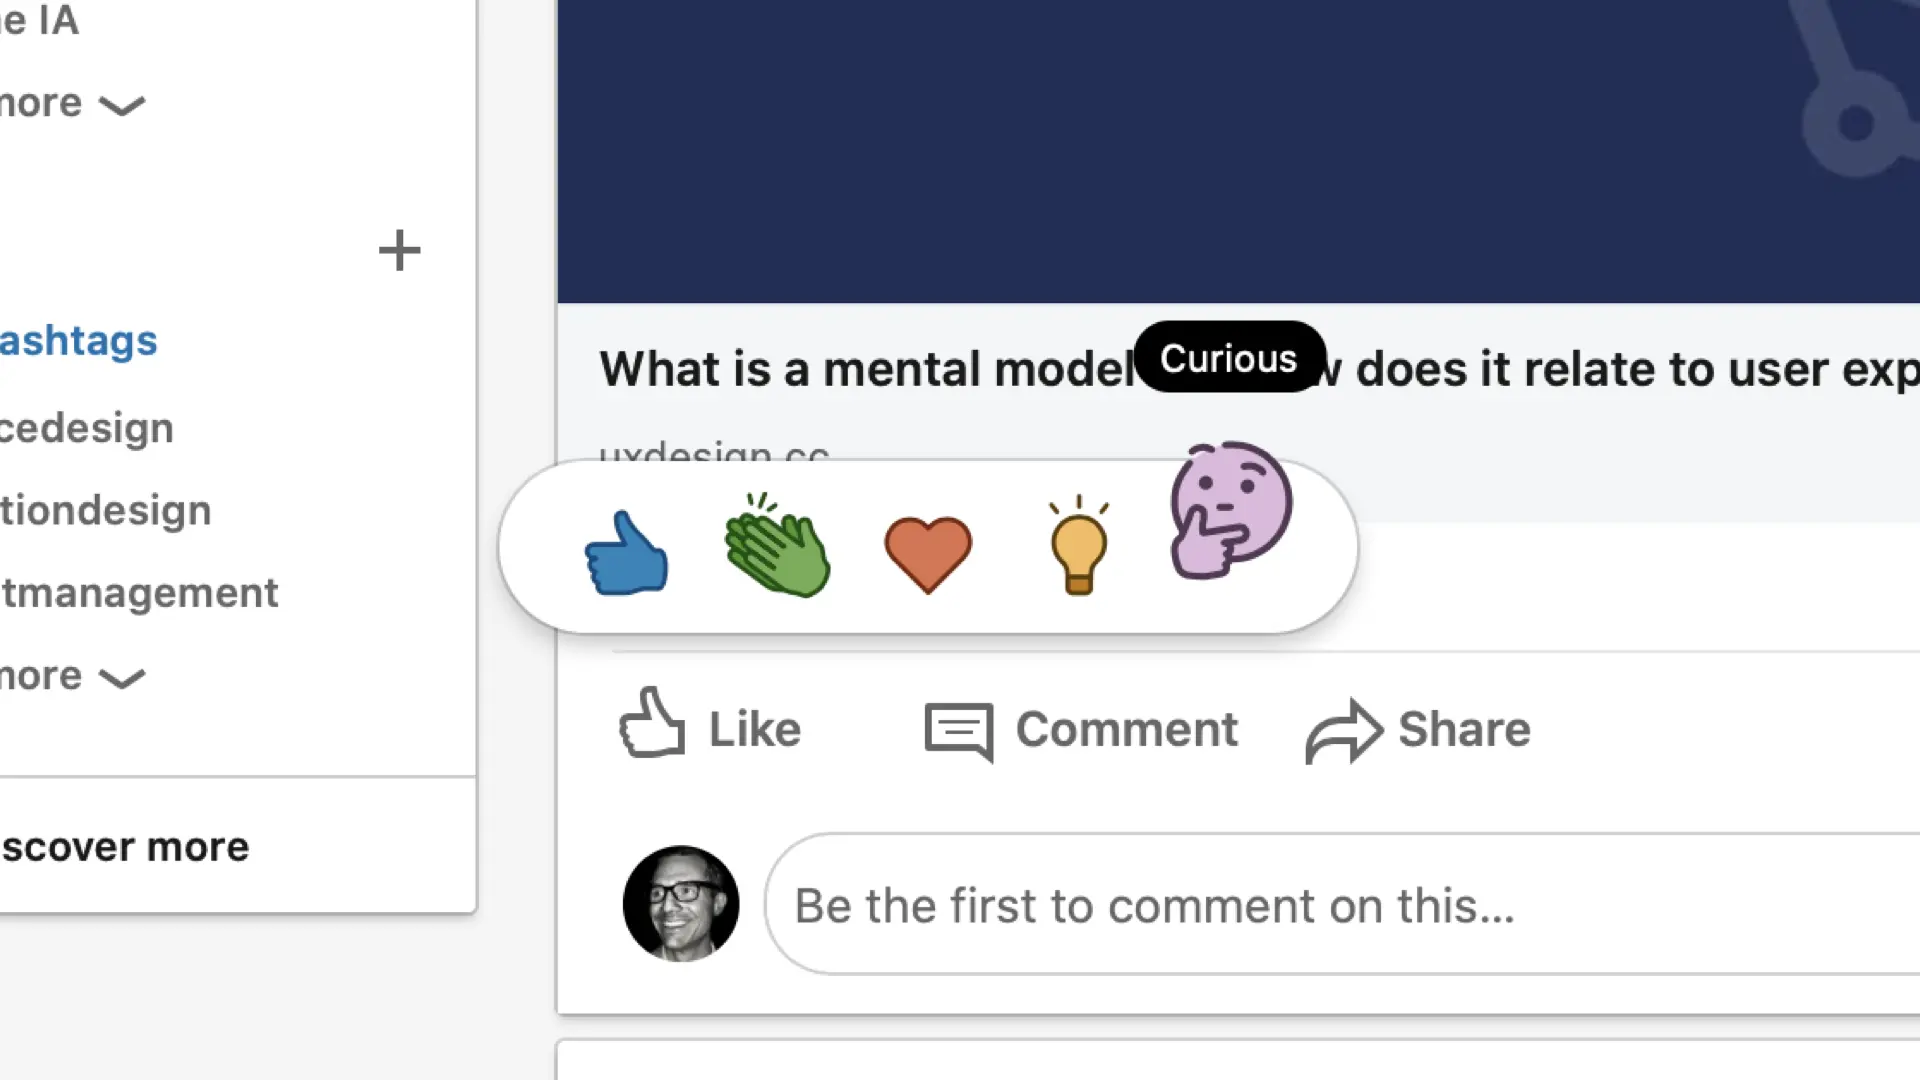 A close-up of a LinkedIn post with reaction options displayed, including a thumbs-up, a green clapping hands, a red heart, a yellow light bulb, and a purple face with a hand on the chin indicating thought or curiosity. The latter option is shown larger than the others.